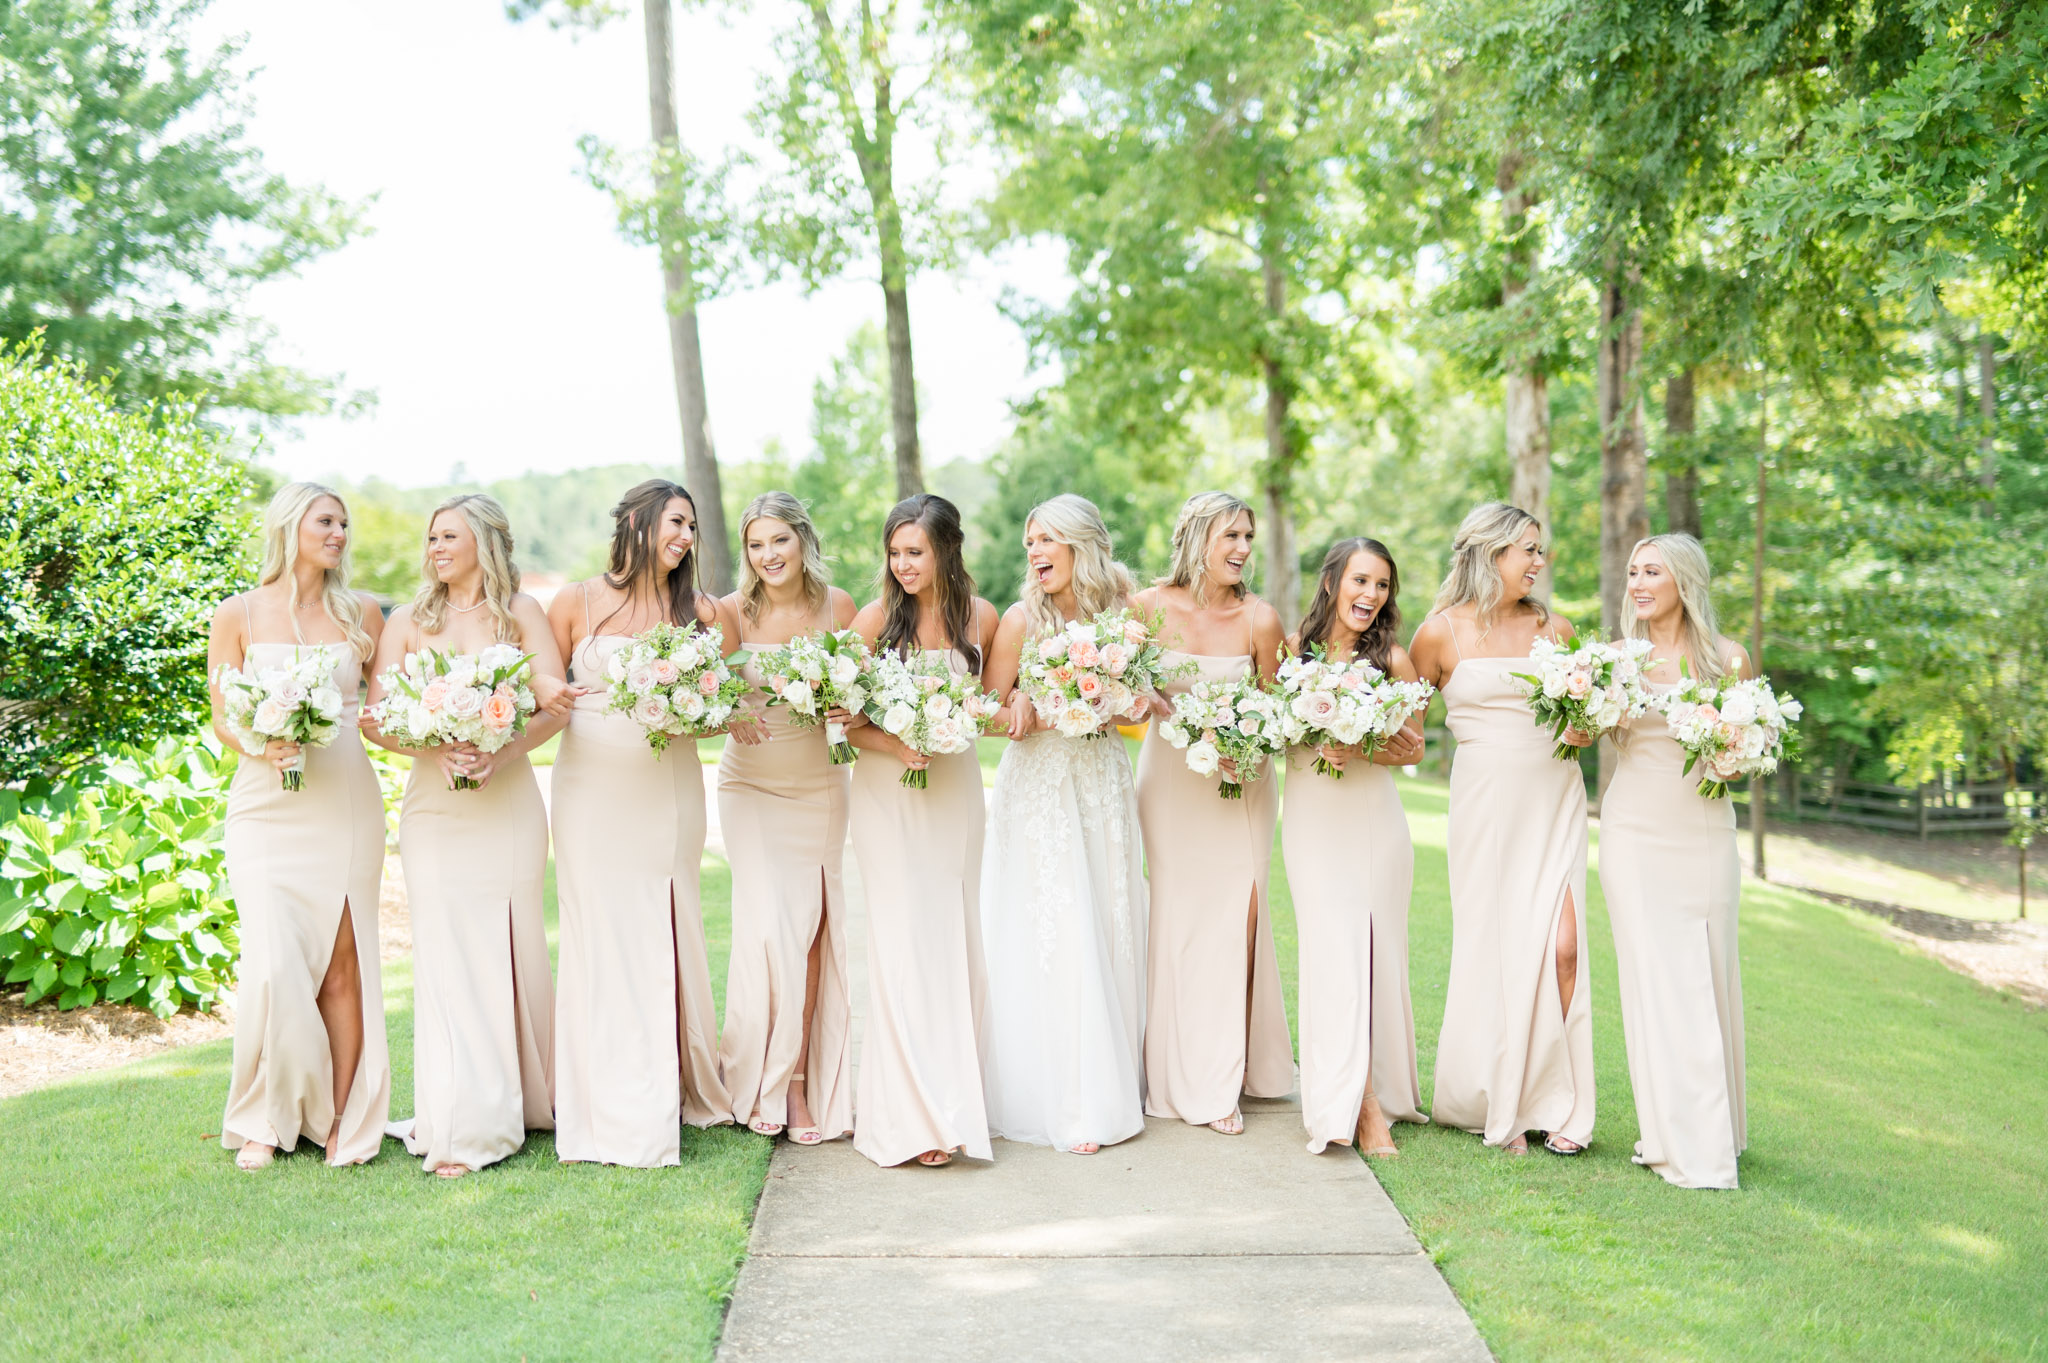 Bride walks with her bridesmaids as they laugh.